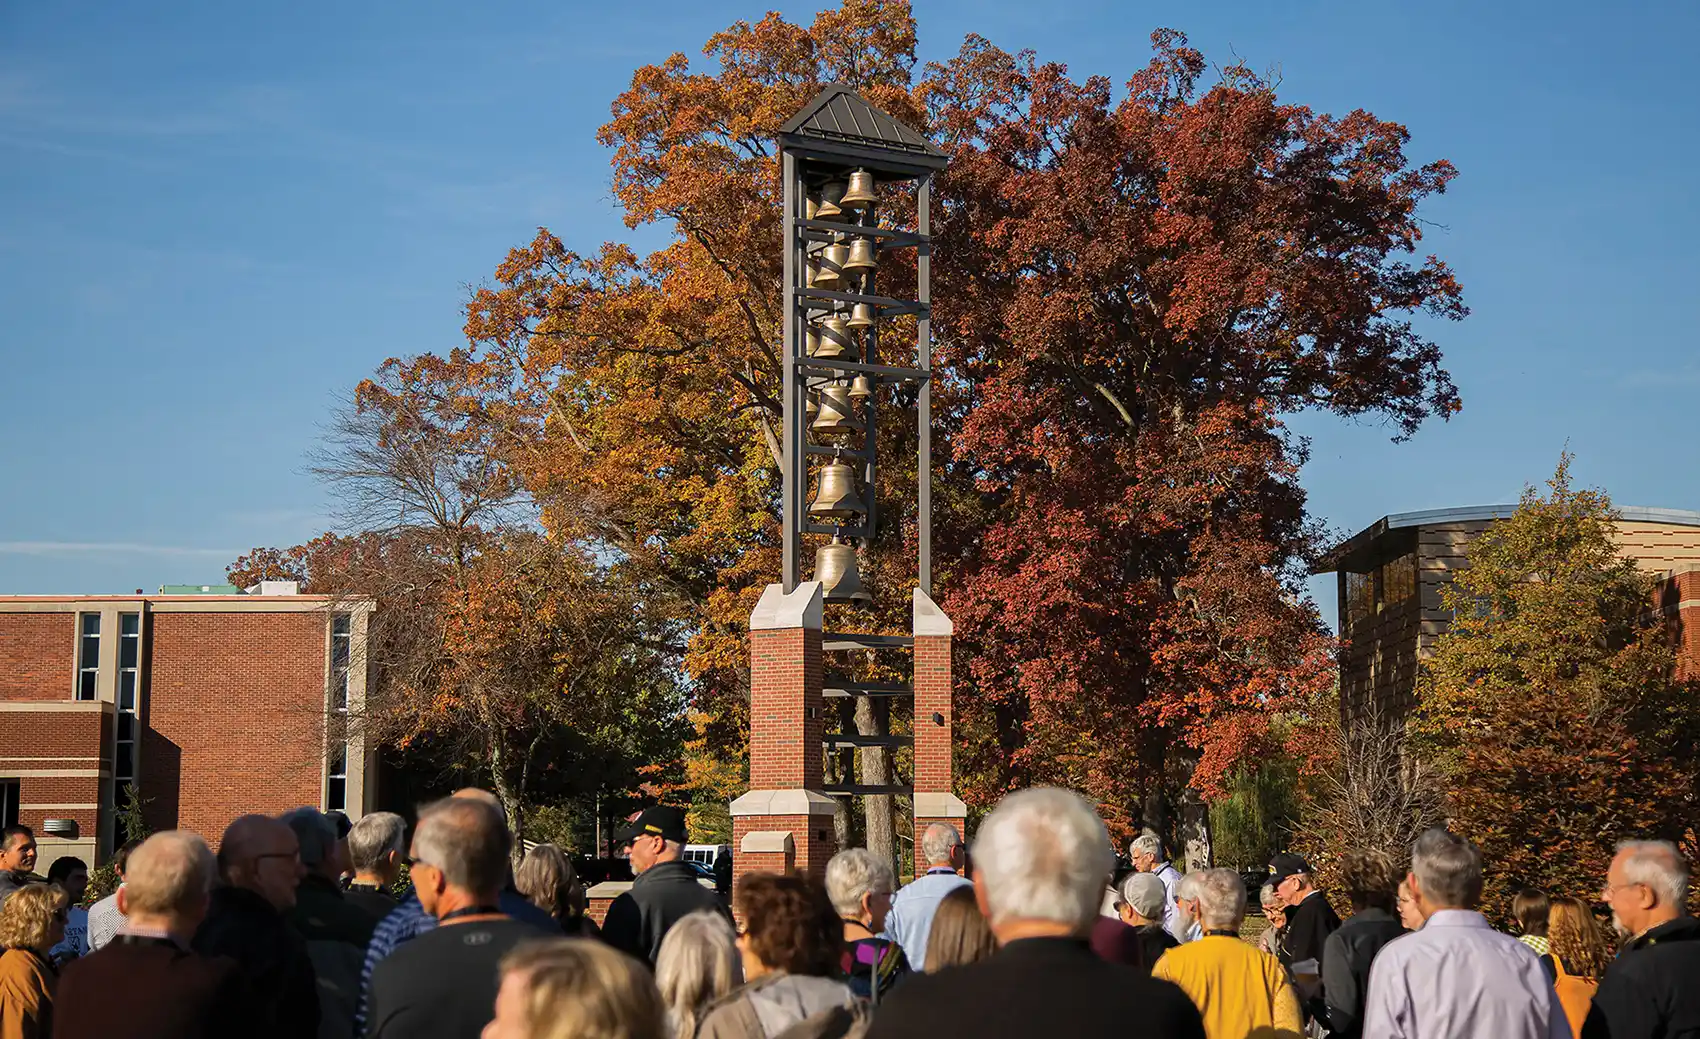 Alumni and students gathered around the Manchester chime during homecoming